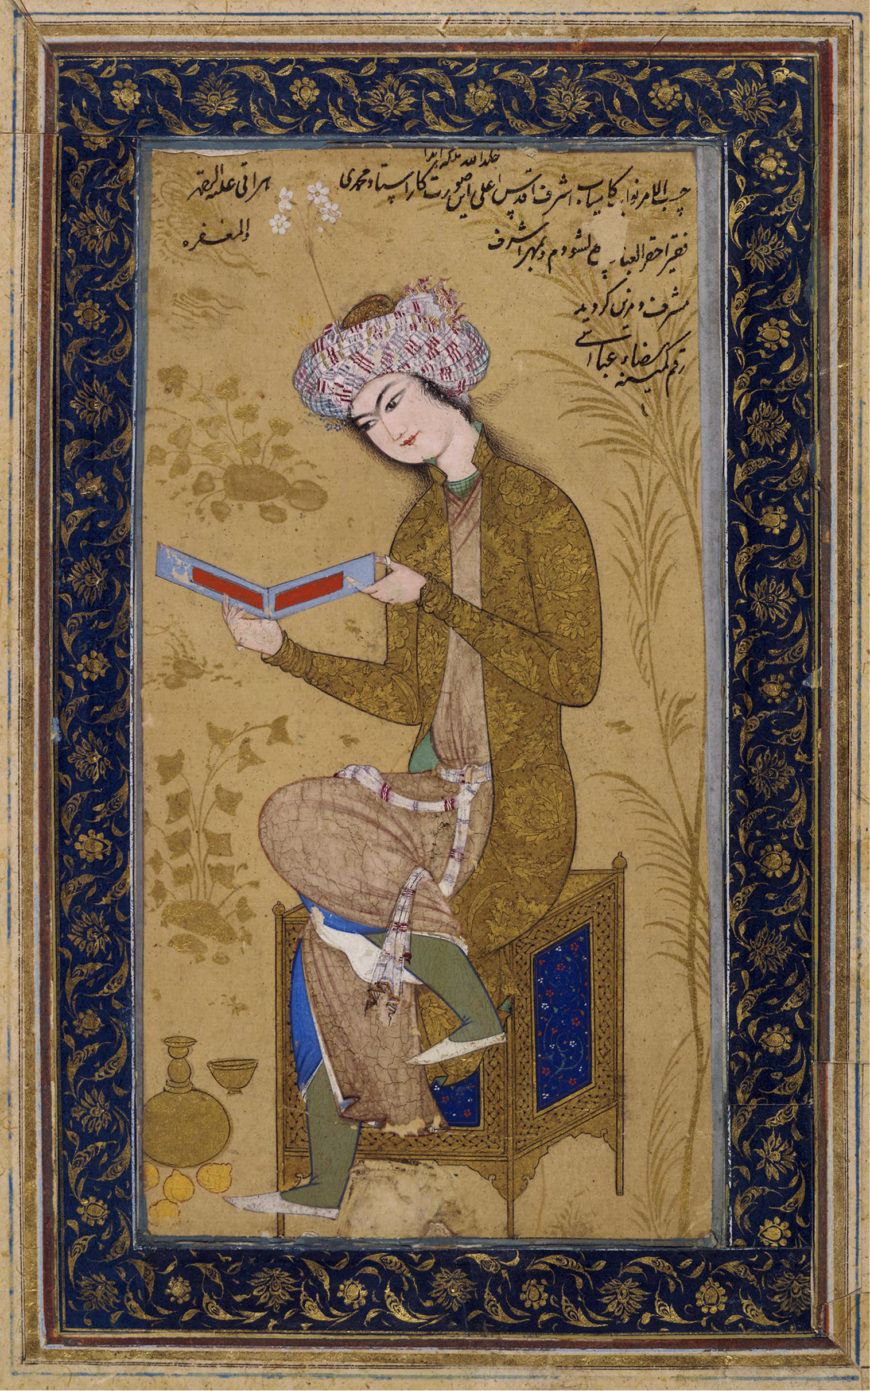 Riza-yi ʿAbbasi, Young page reading, c. 1600, drawing, rom Isfahan, Iran (© The Trustees of the British Museum)